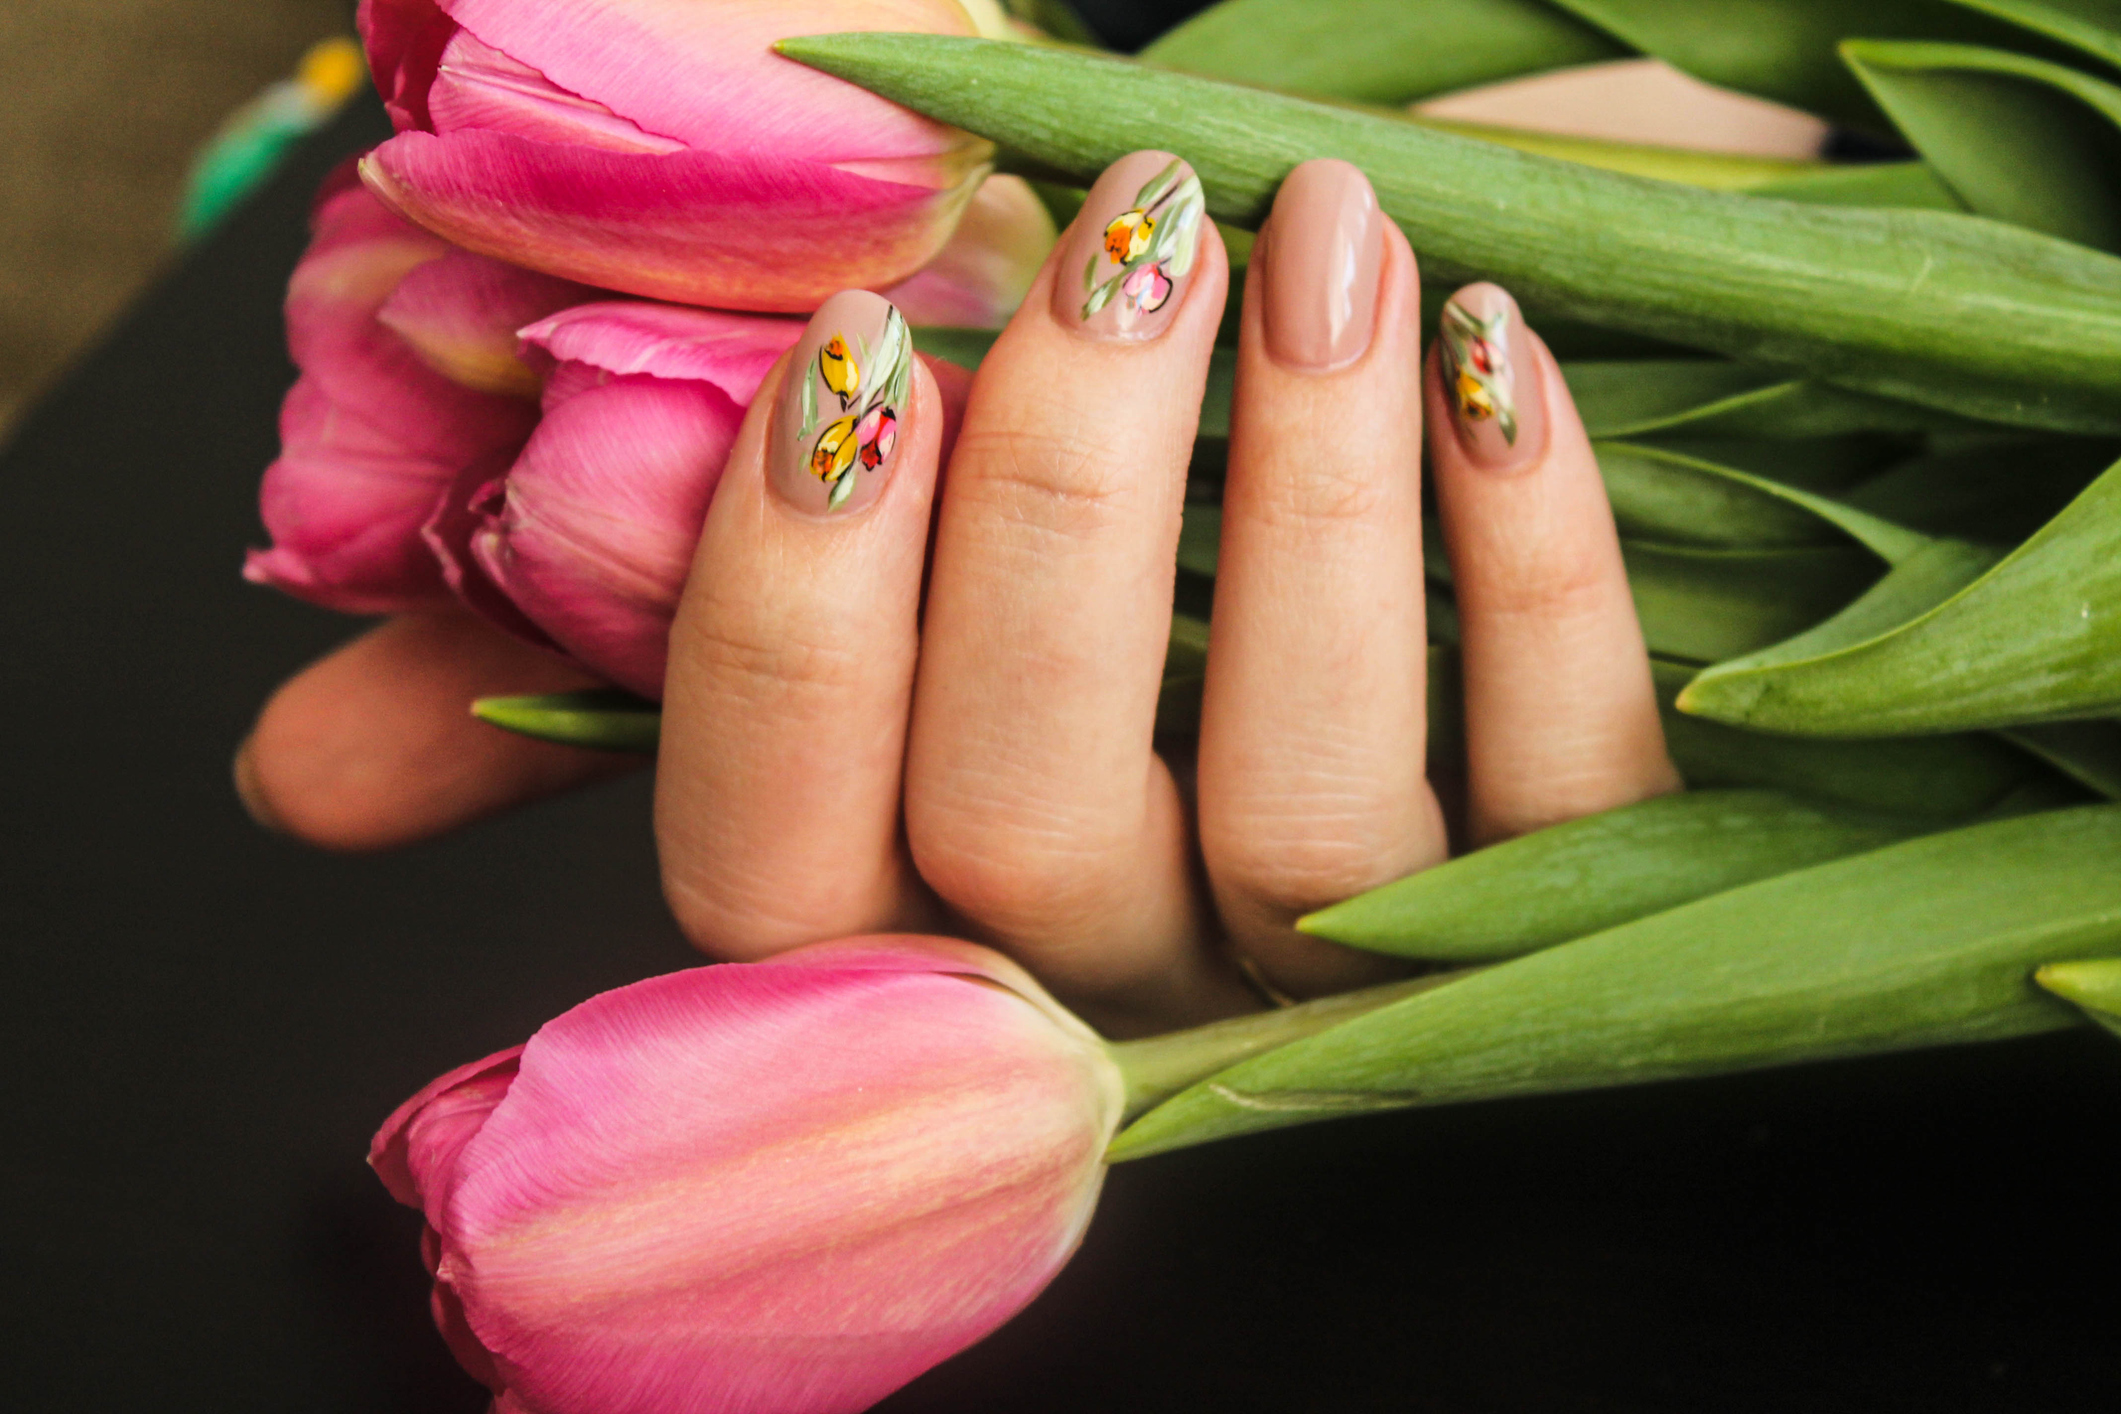 Enjoy Luxurious Pampering This Easter at the Bryan Nail and Spa